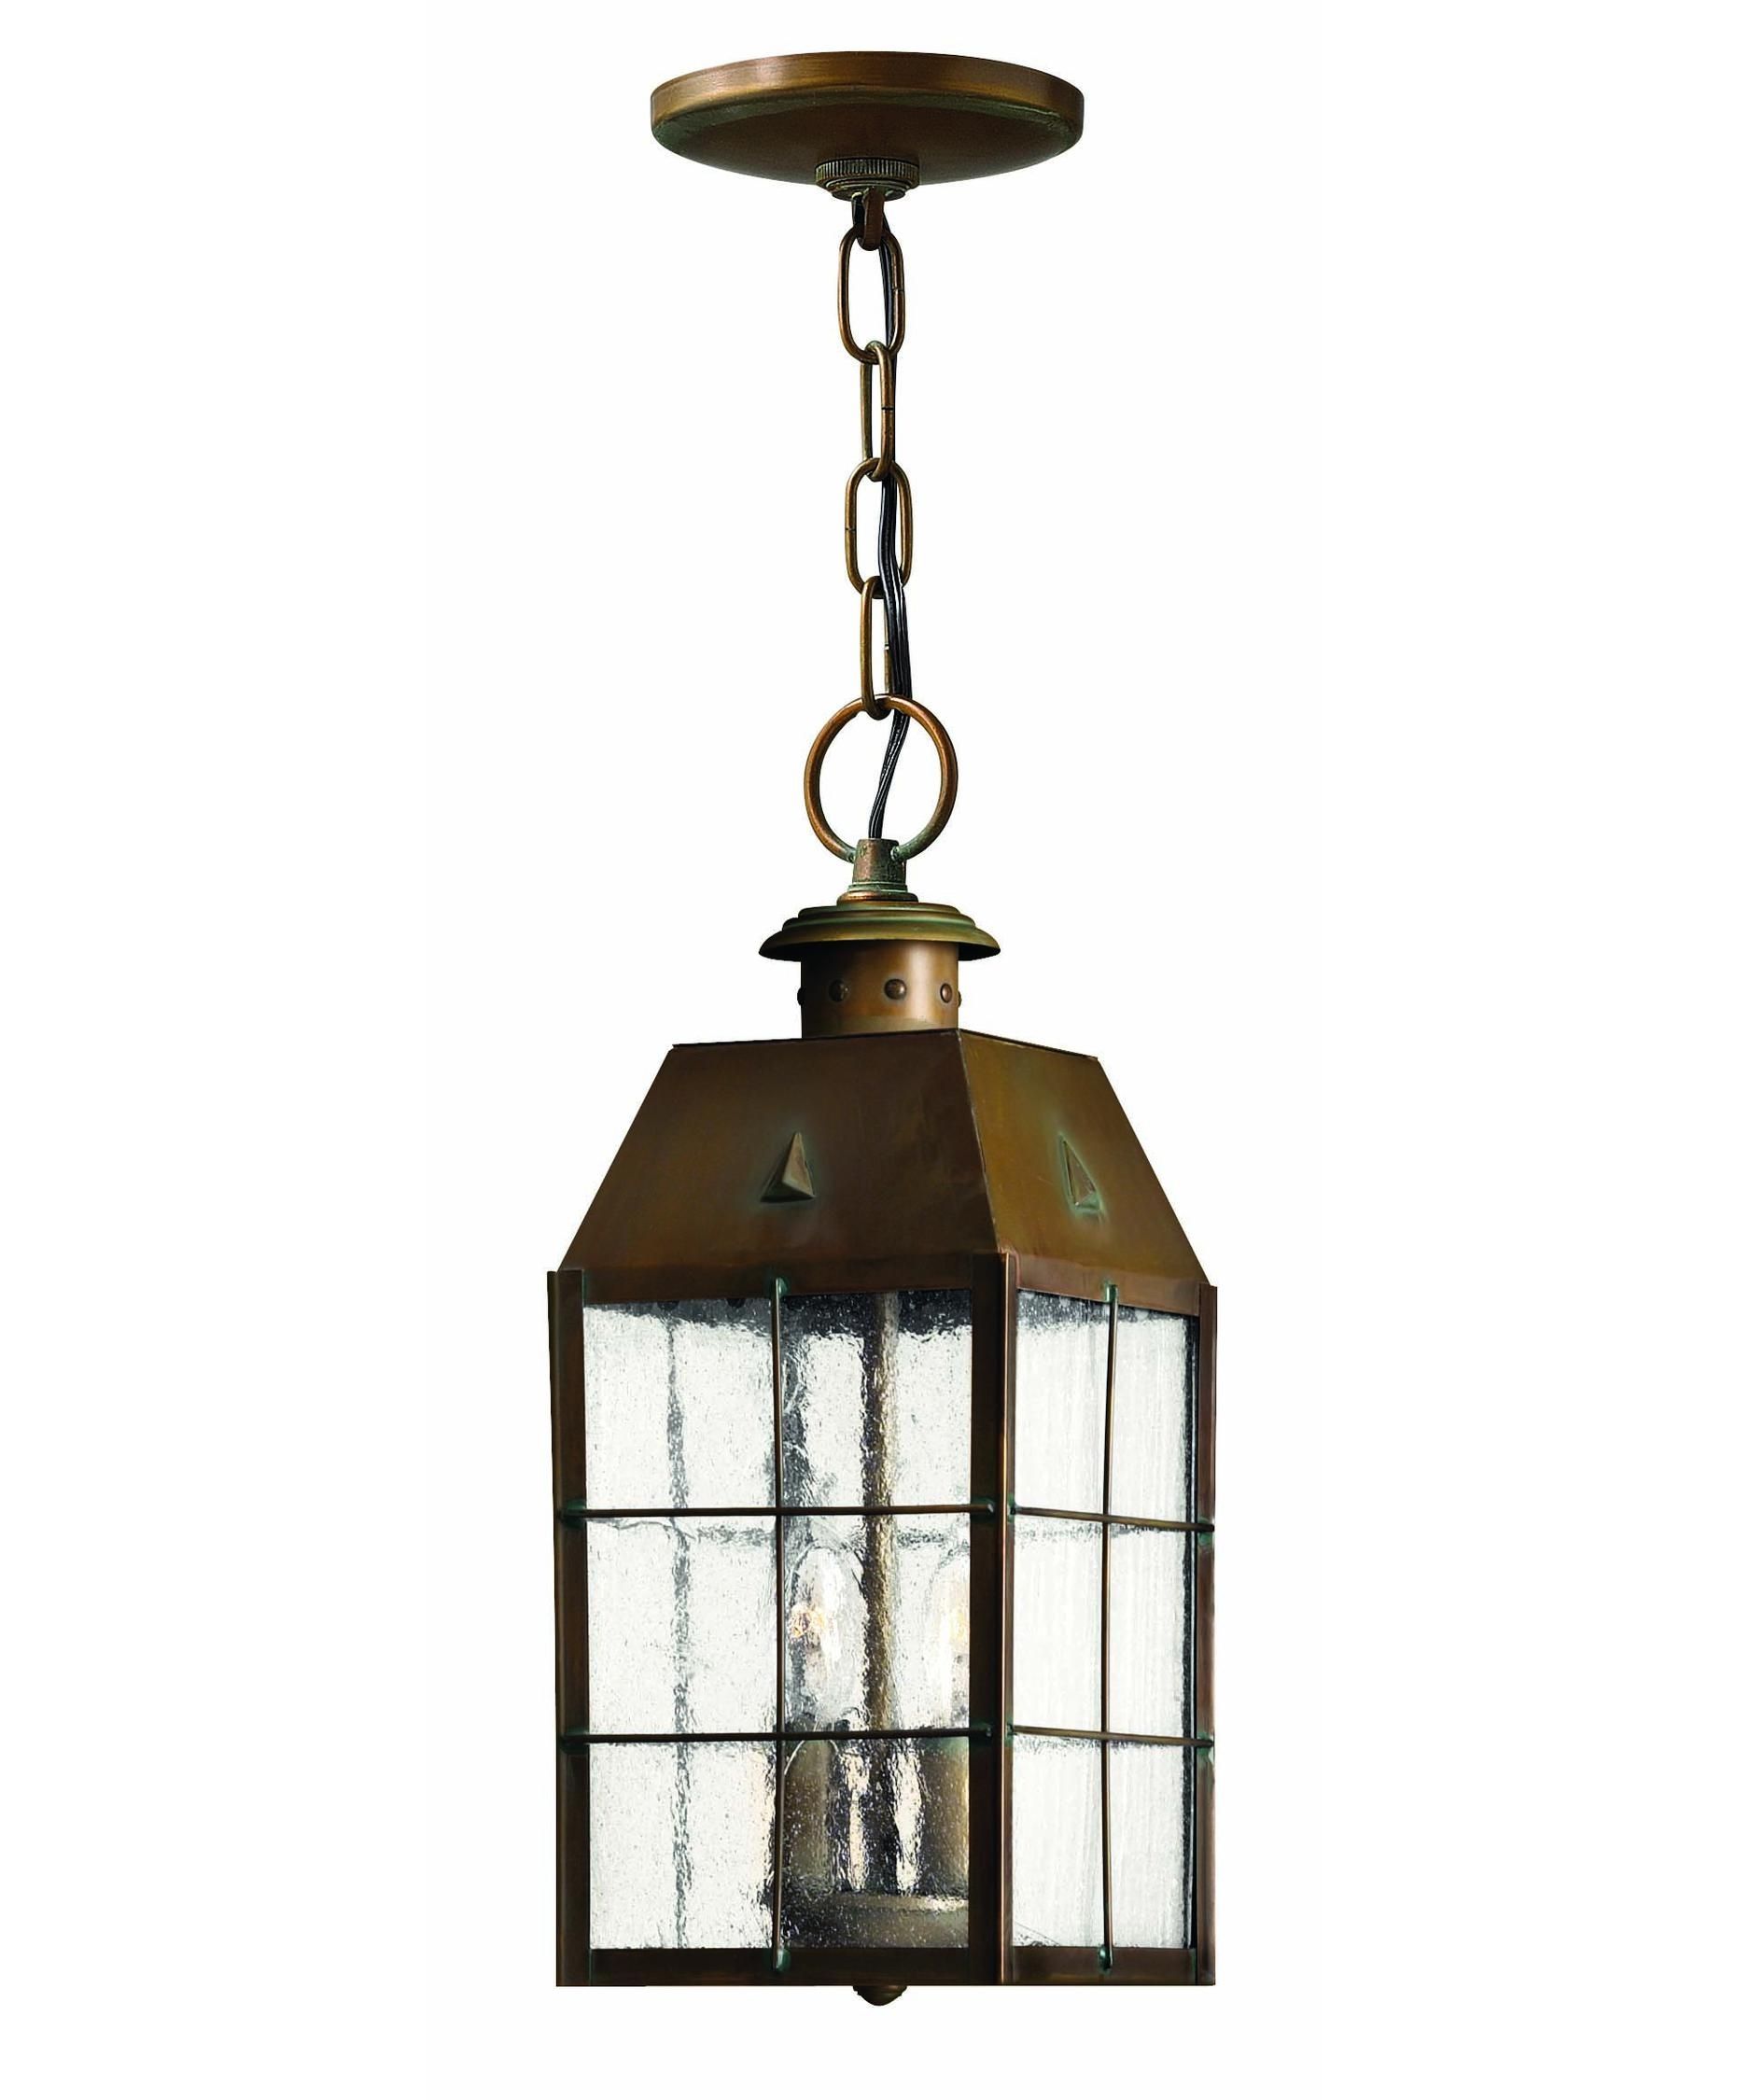 Hanging Porch Light Hinkley Lighting 2372 Nantucket 6 Inch Wide 2 With Regard To Hanging Porch Hinkley Lighting (Photo 1 of 15)